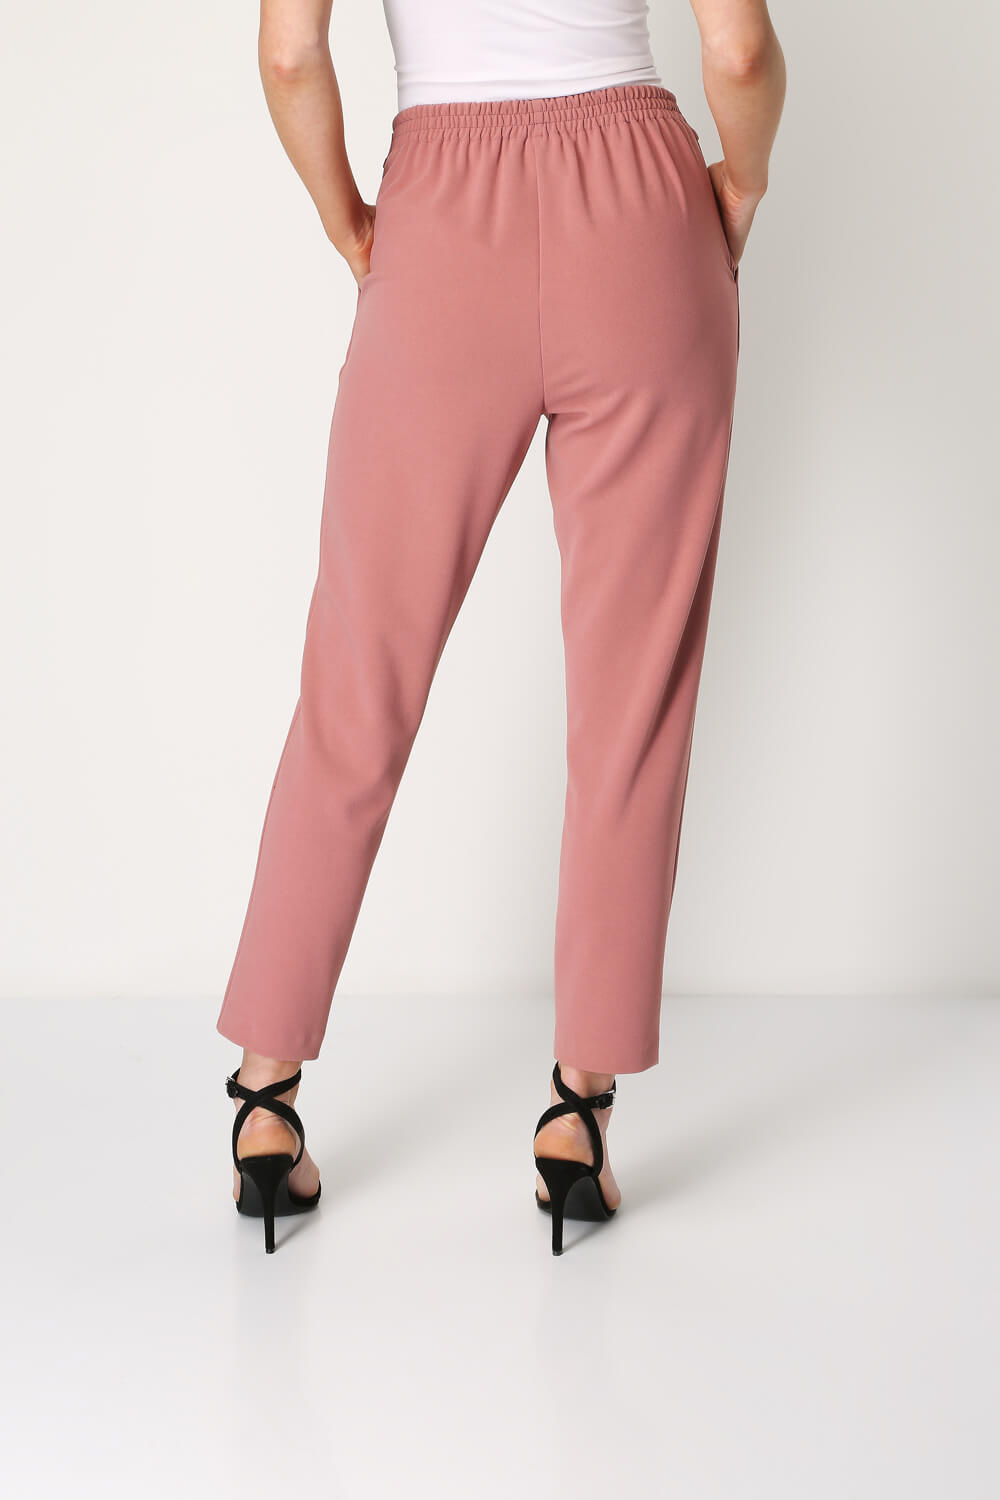 Belted Tailored Trousers in PINK - Roman Originals UK